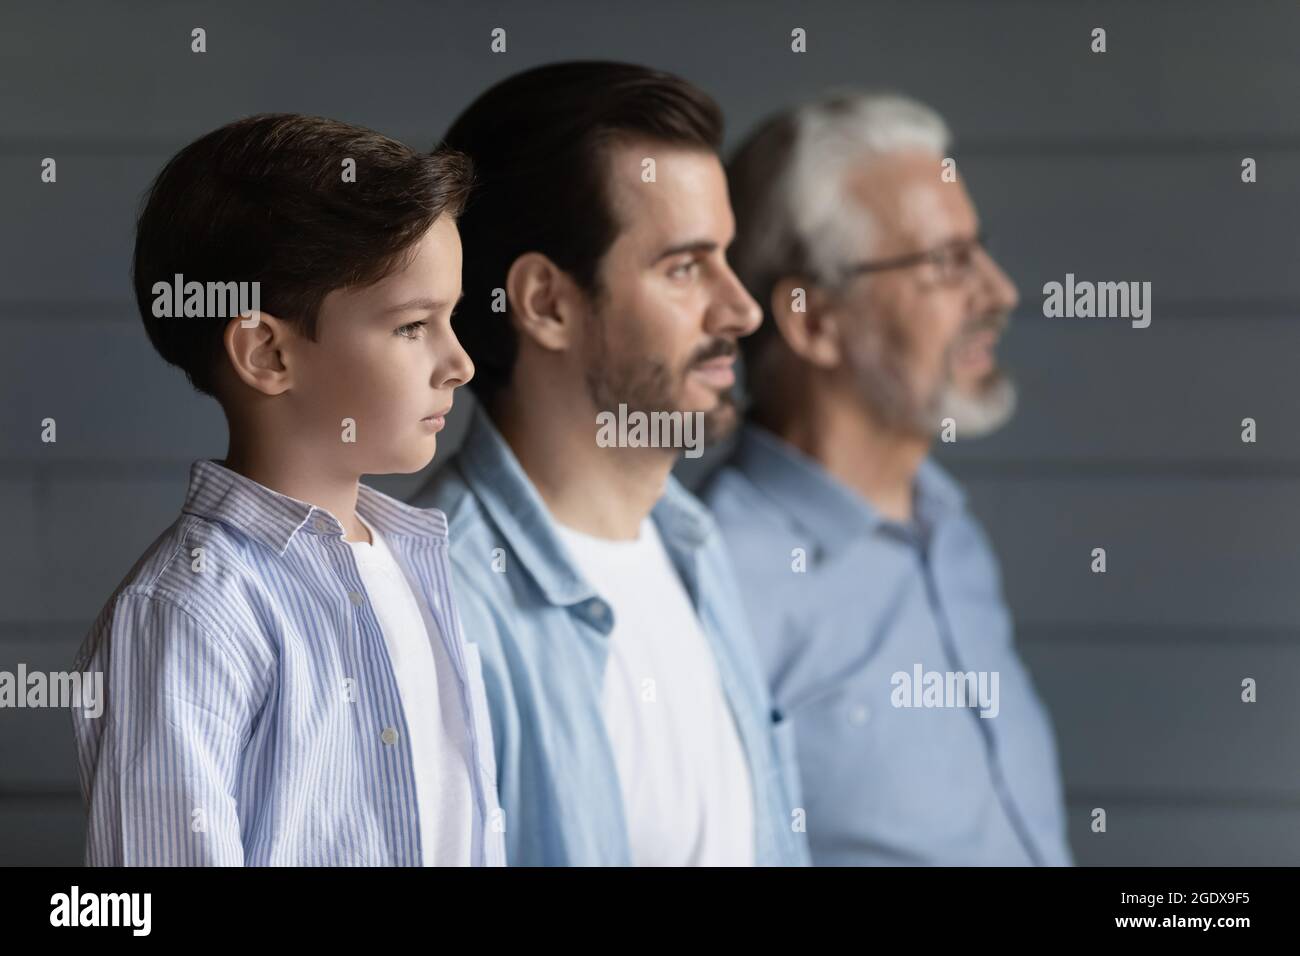 Three generations of men pose together showing unity Stock Photo